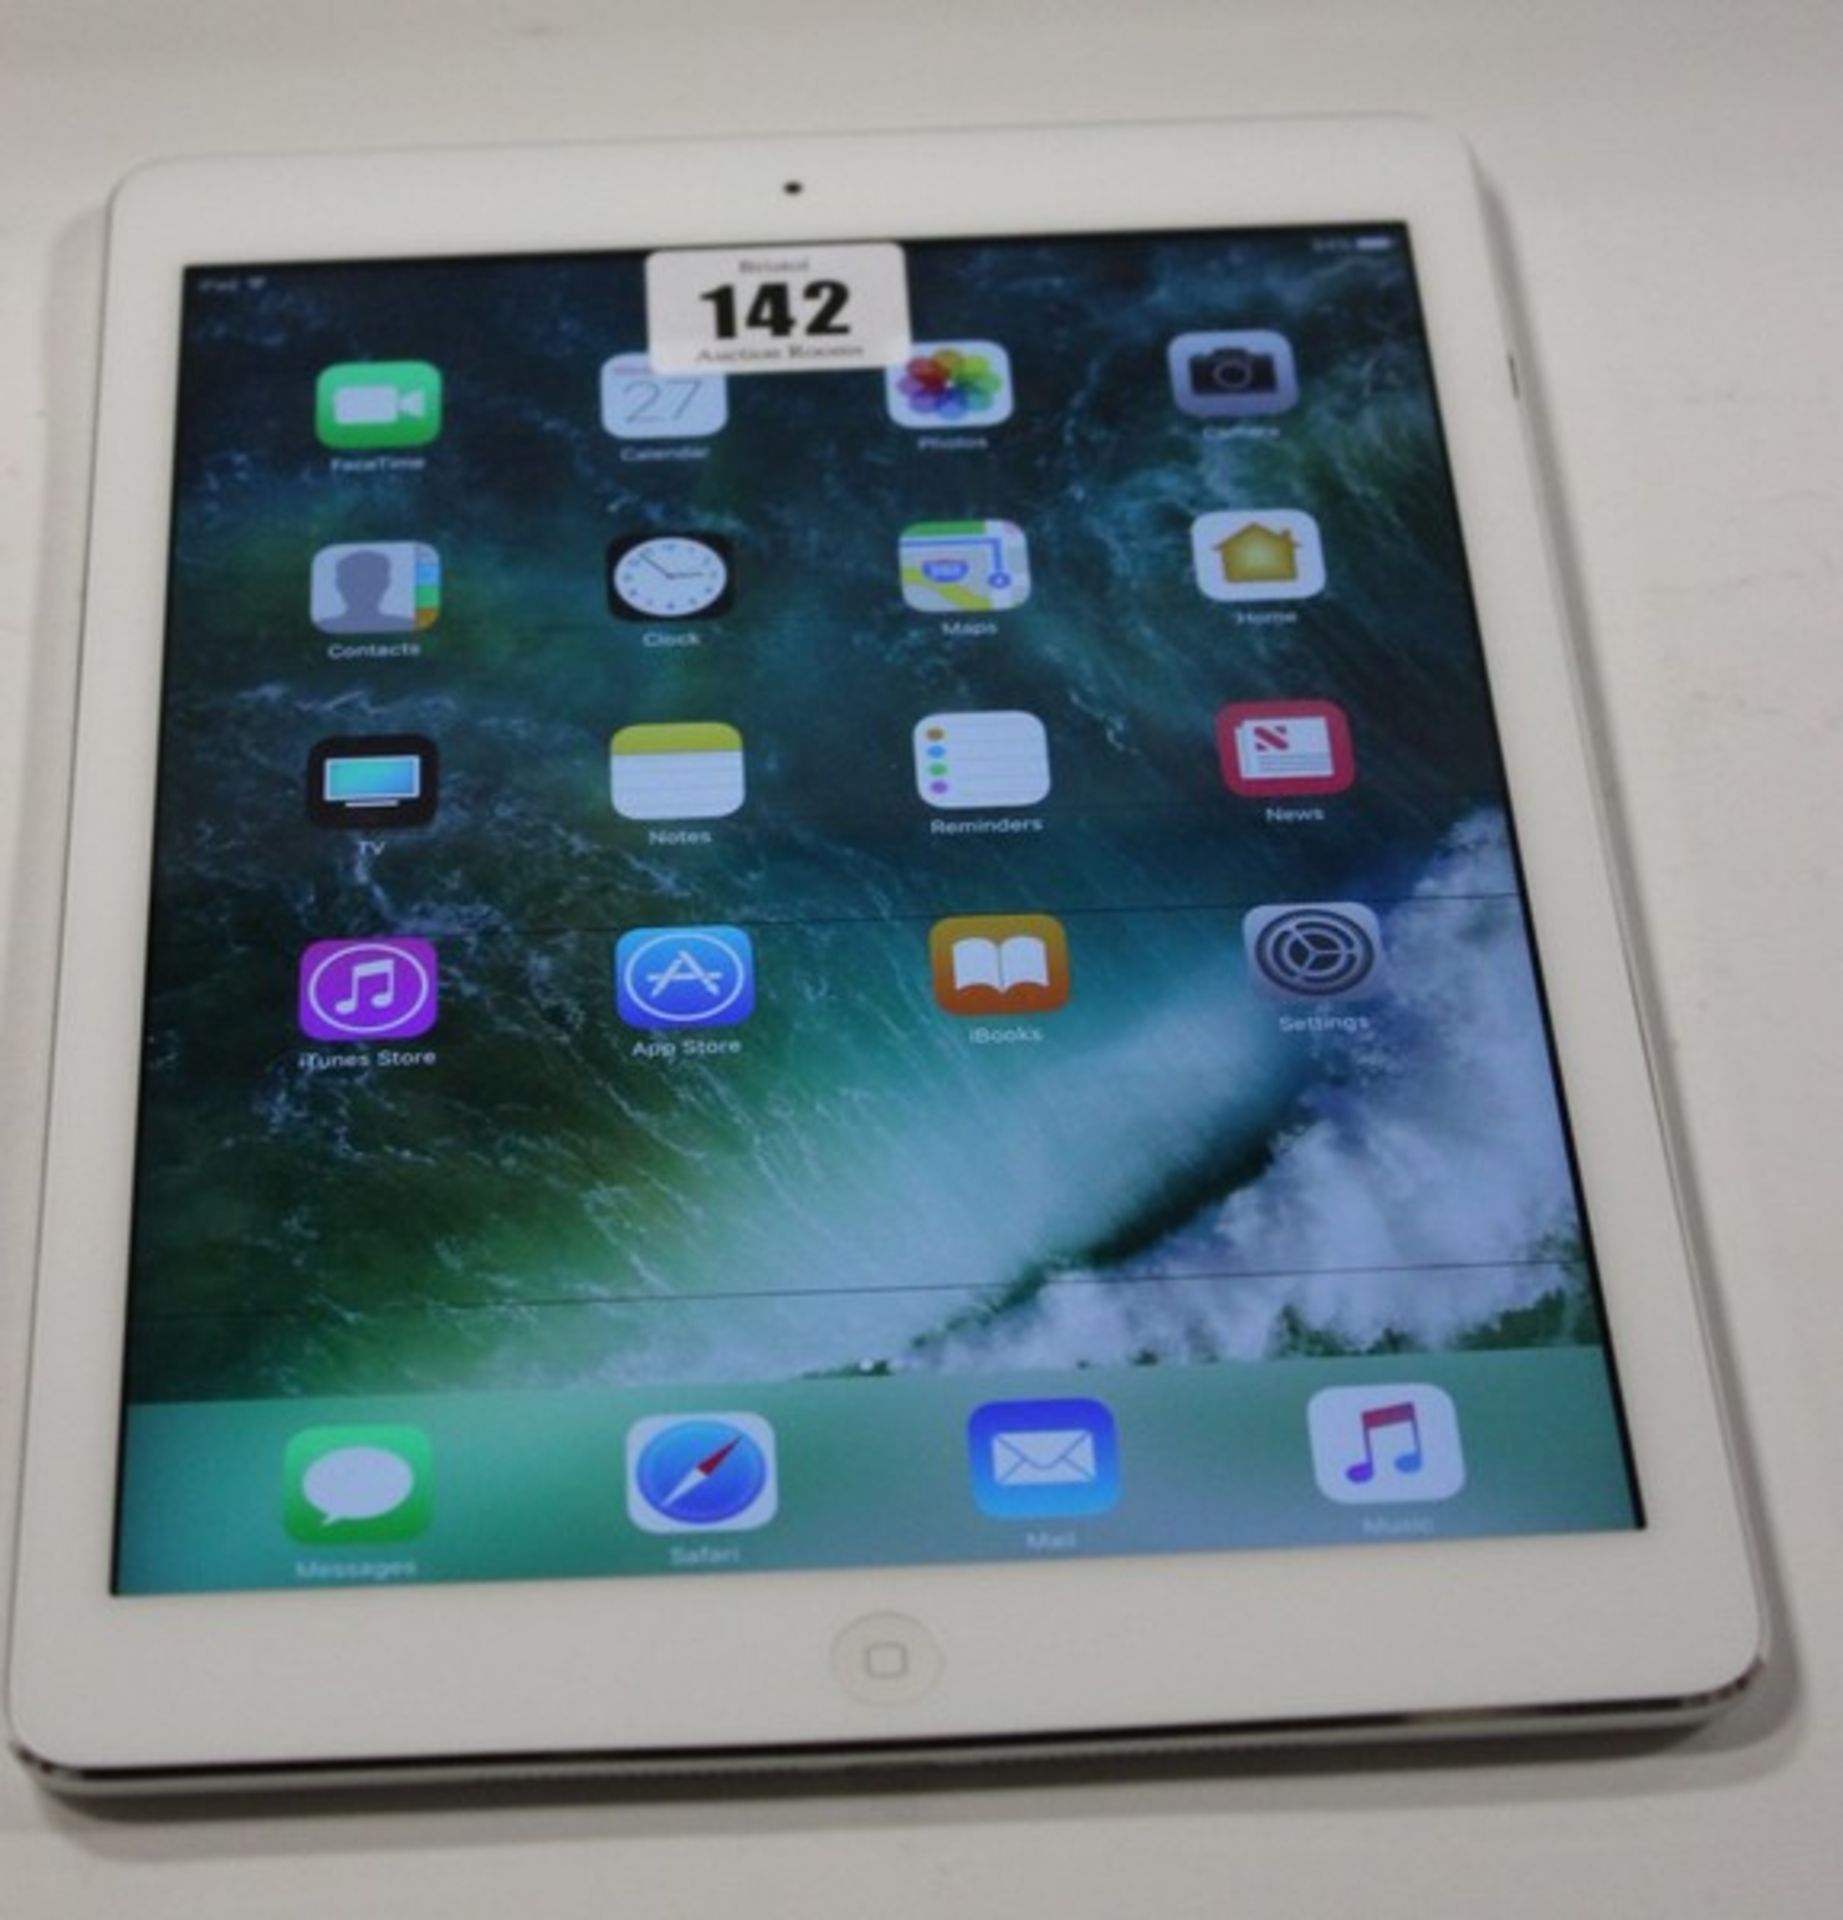 An iPad Air 32GB A1474 serial: DLXLJPLPFK15 (Activation clear, faulty screen).